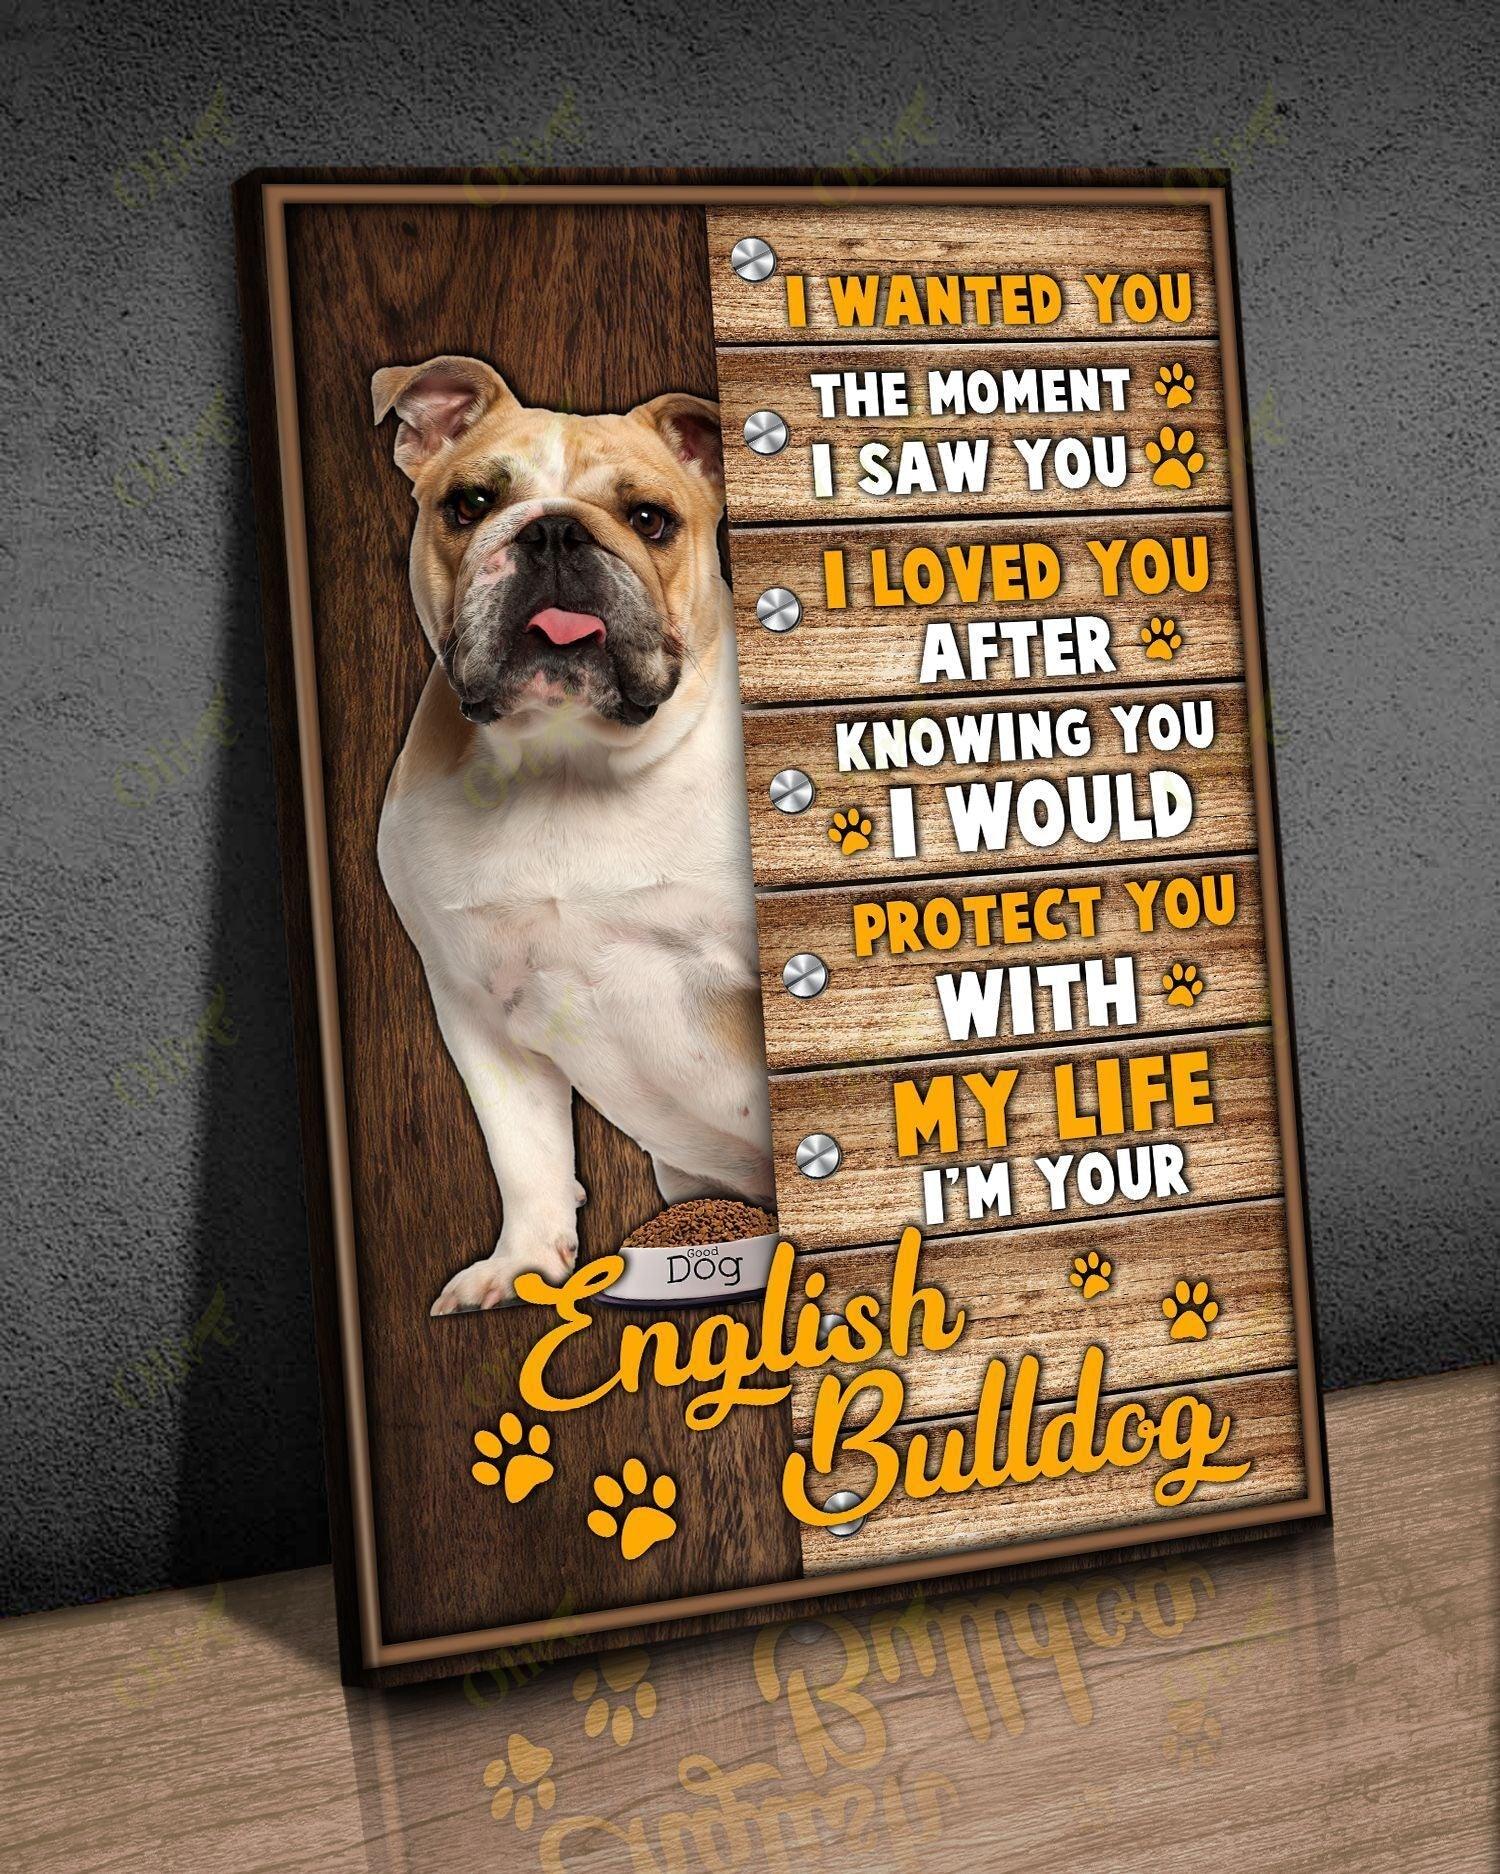 English Bulldog Portrait Canvas - I Would Protect You With My Life I'm Your English Bulldog Canvas - Gift For Dog Lovers, Family, Friends - Amzanimalsgift